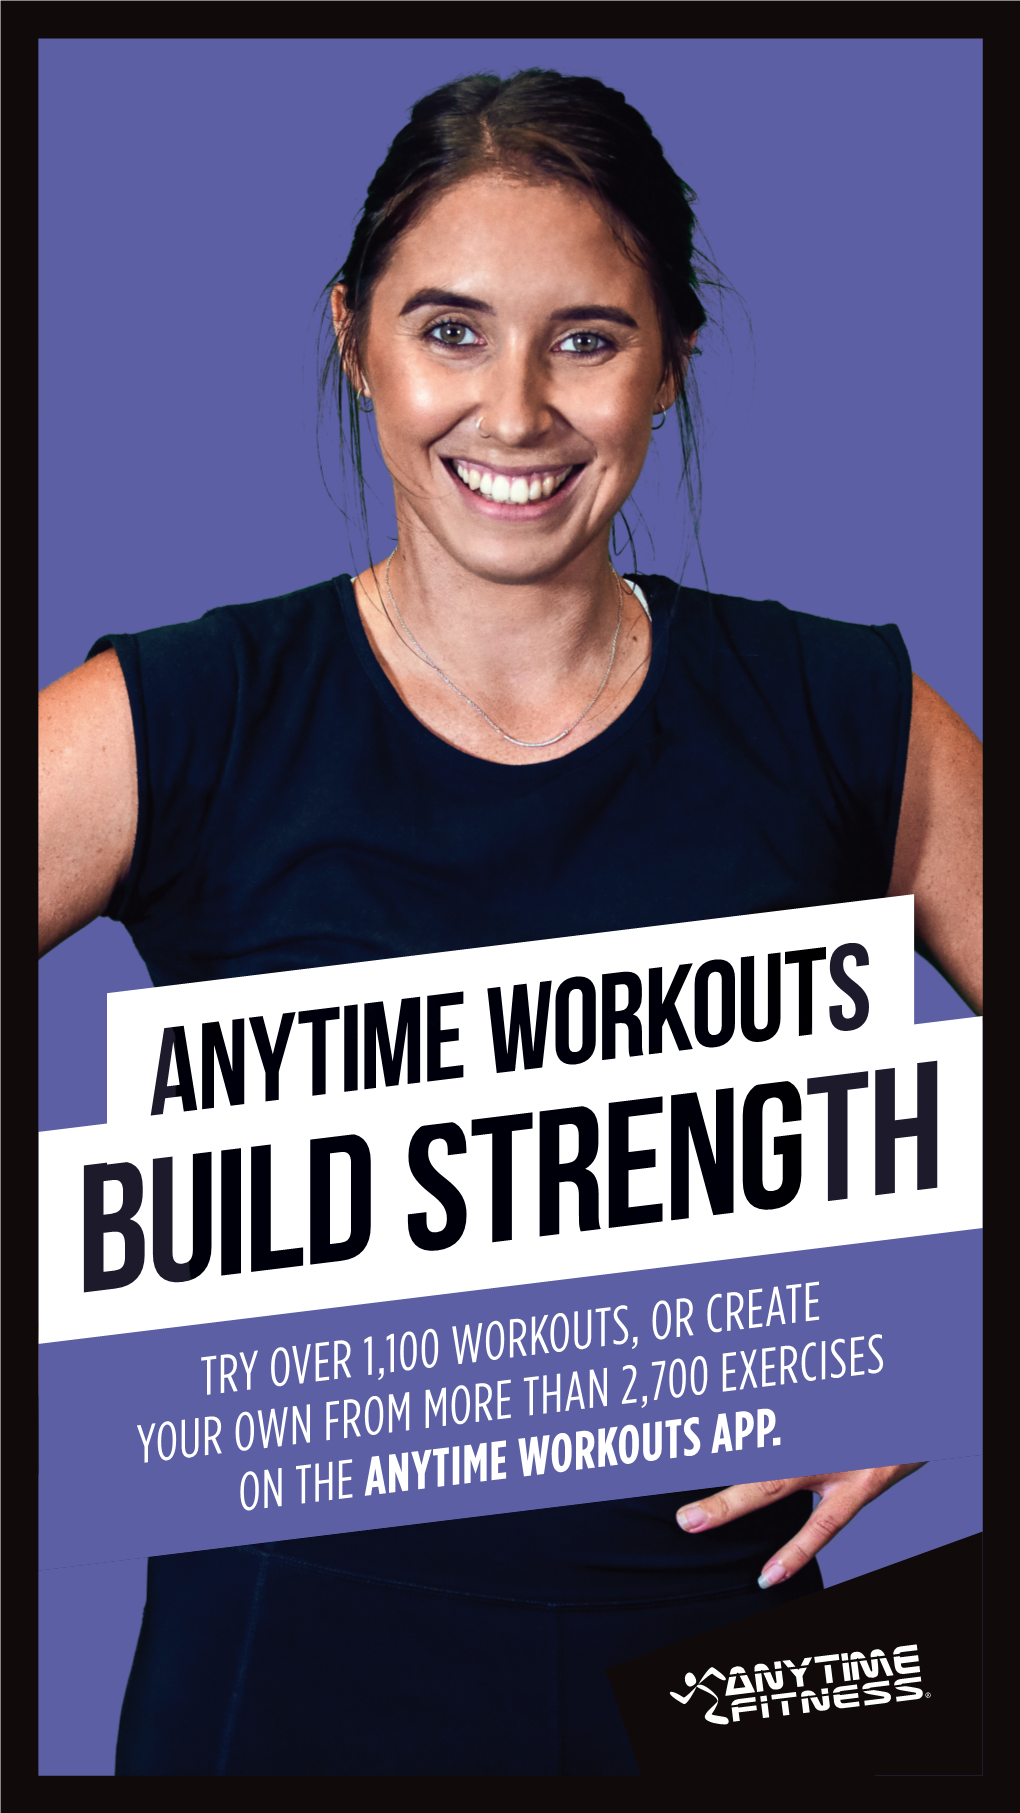 Try Over 1,100 Workouts, Or Create Your Own from More Than 2,700 Exercises on the Anytime Workouts App